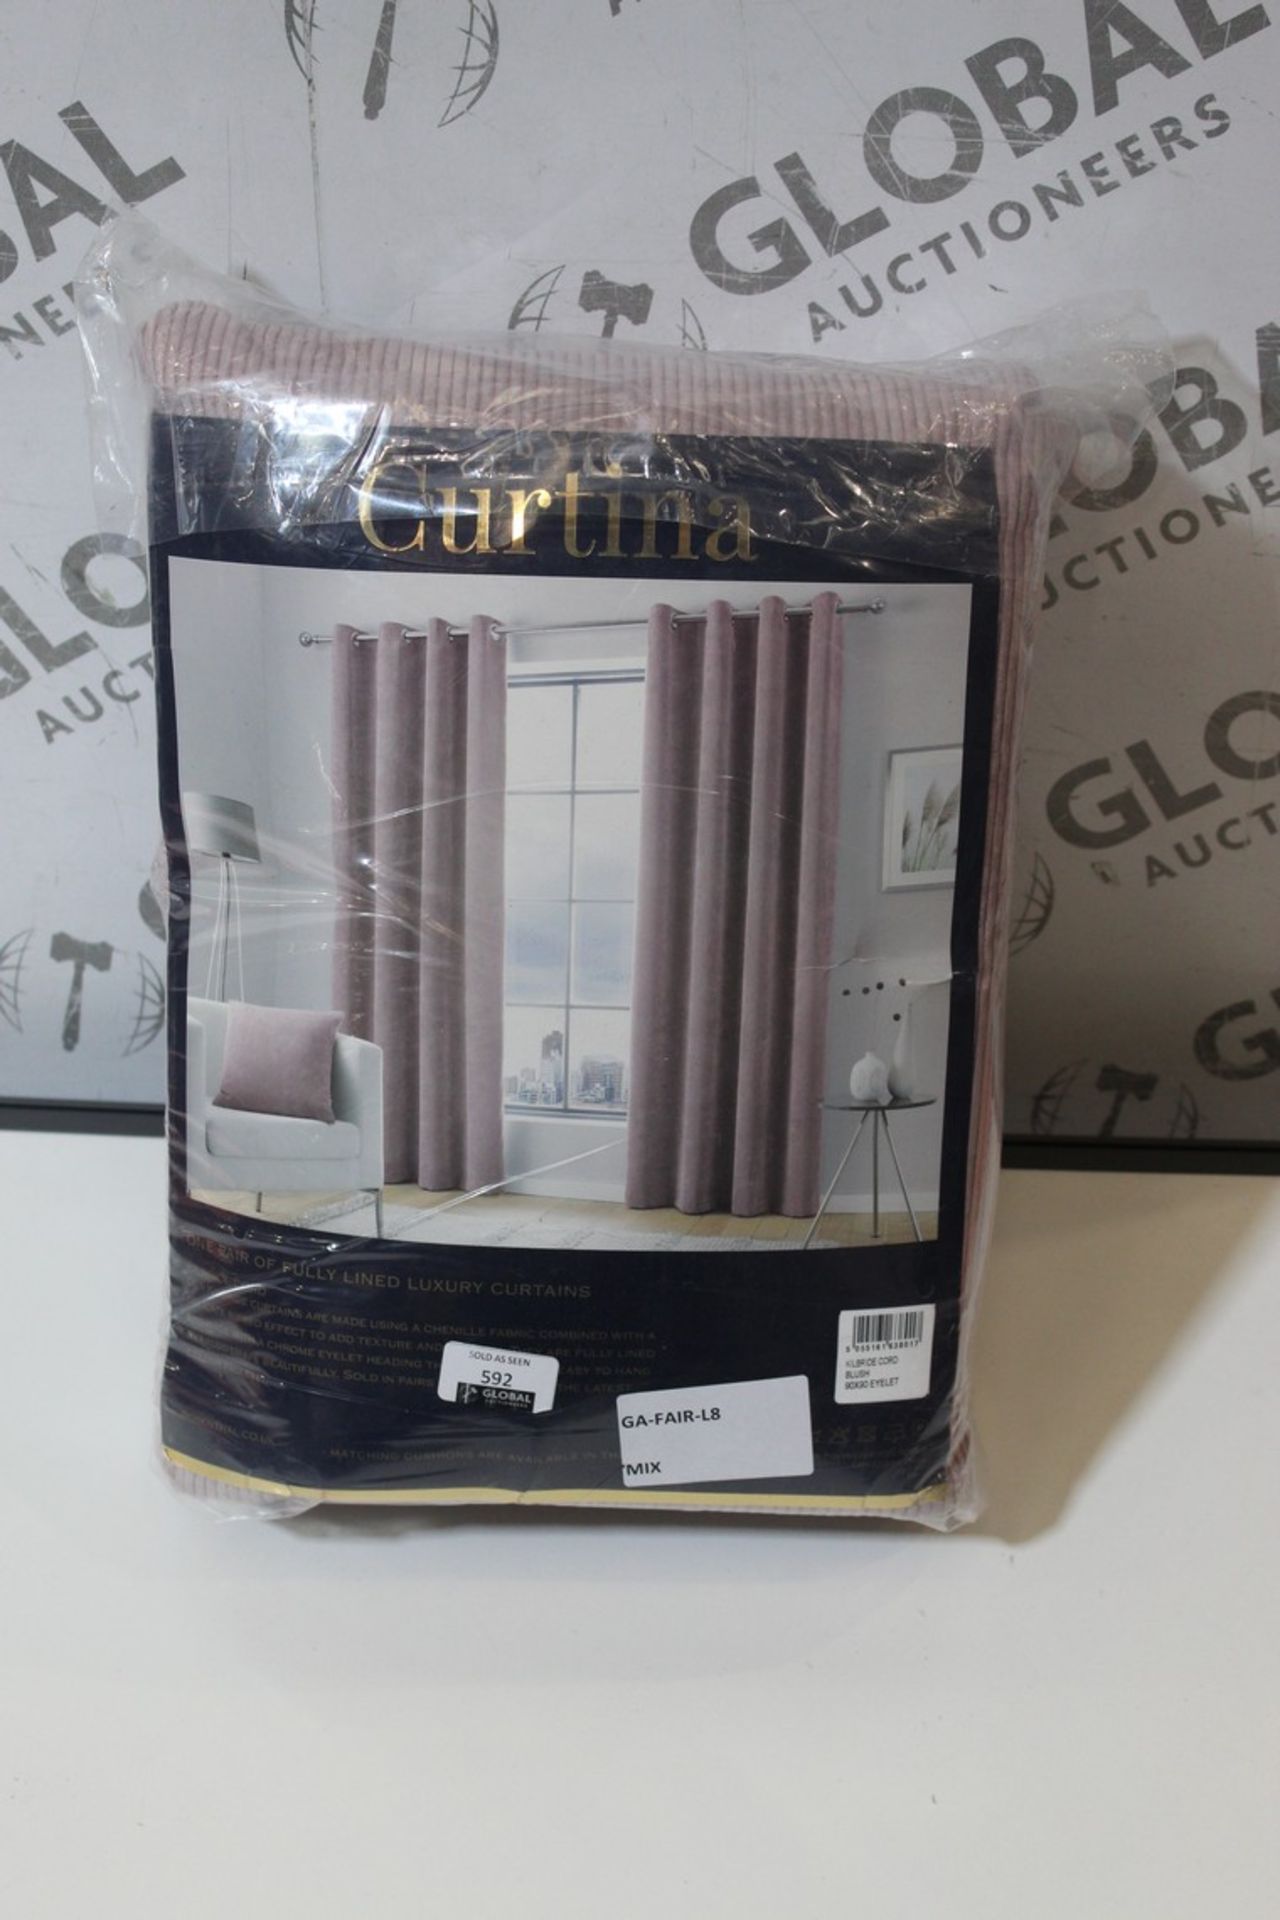 Bagged Curtina Luxury Blush Curtains - Image 2 of 2